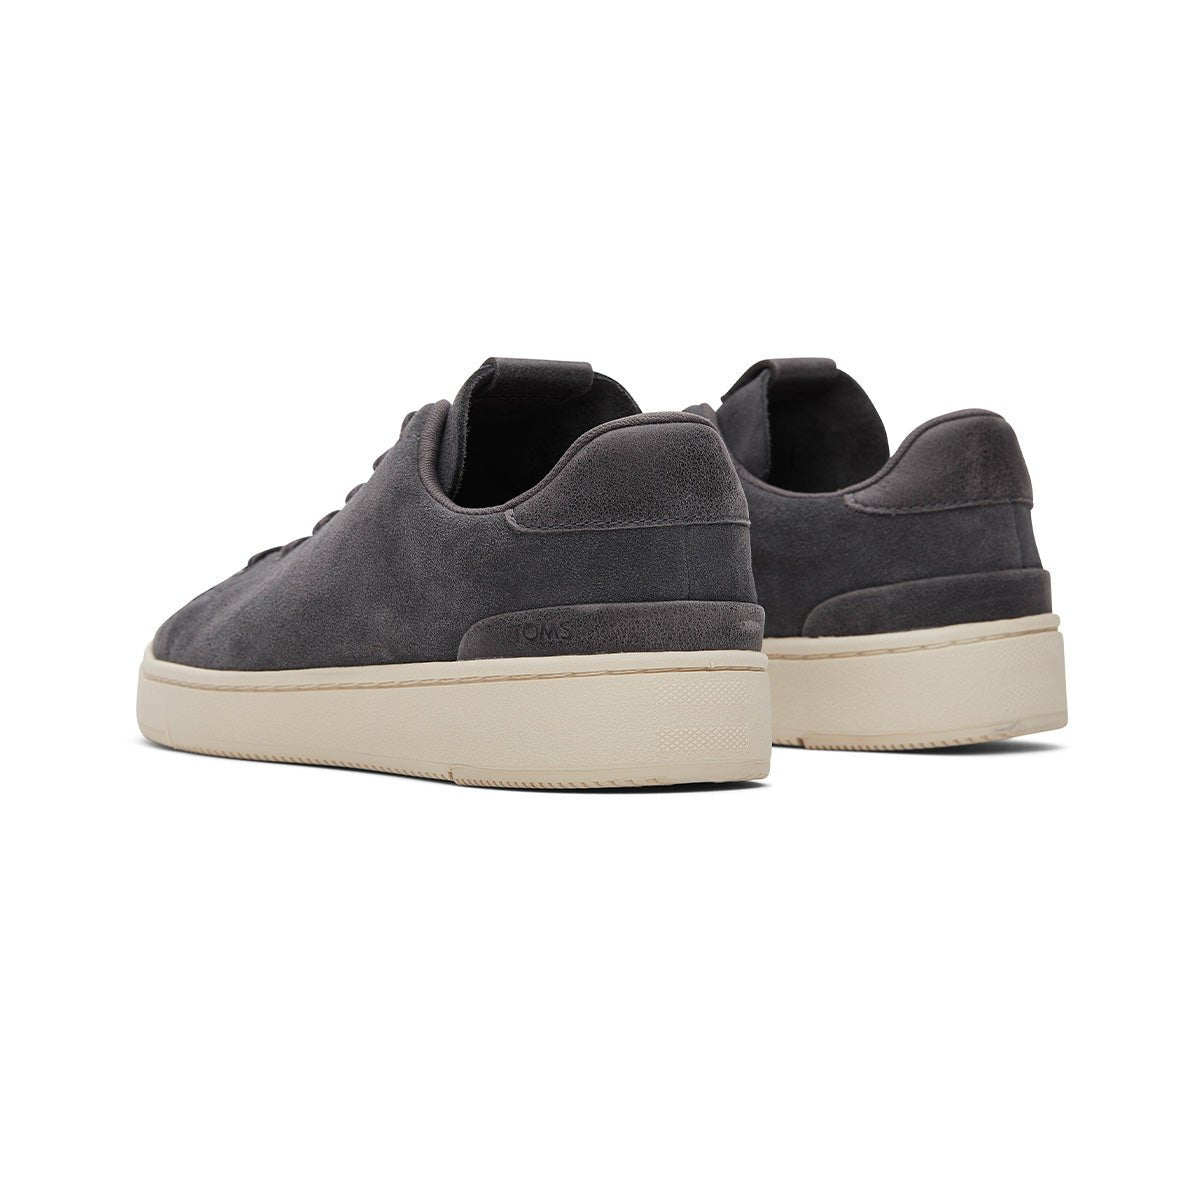 TOMS Sneaker Travel Lite 2.0 Low Men - Forged Iron Green Suede Canvas